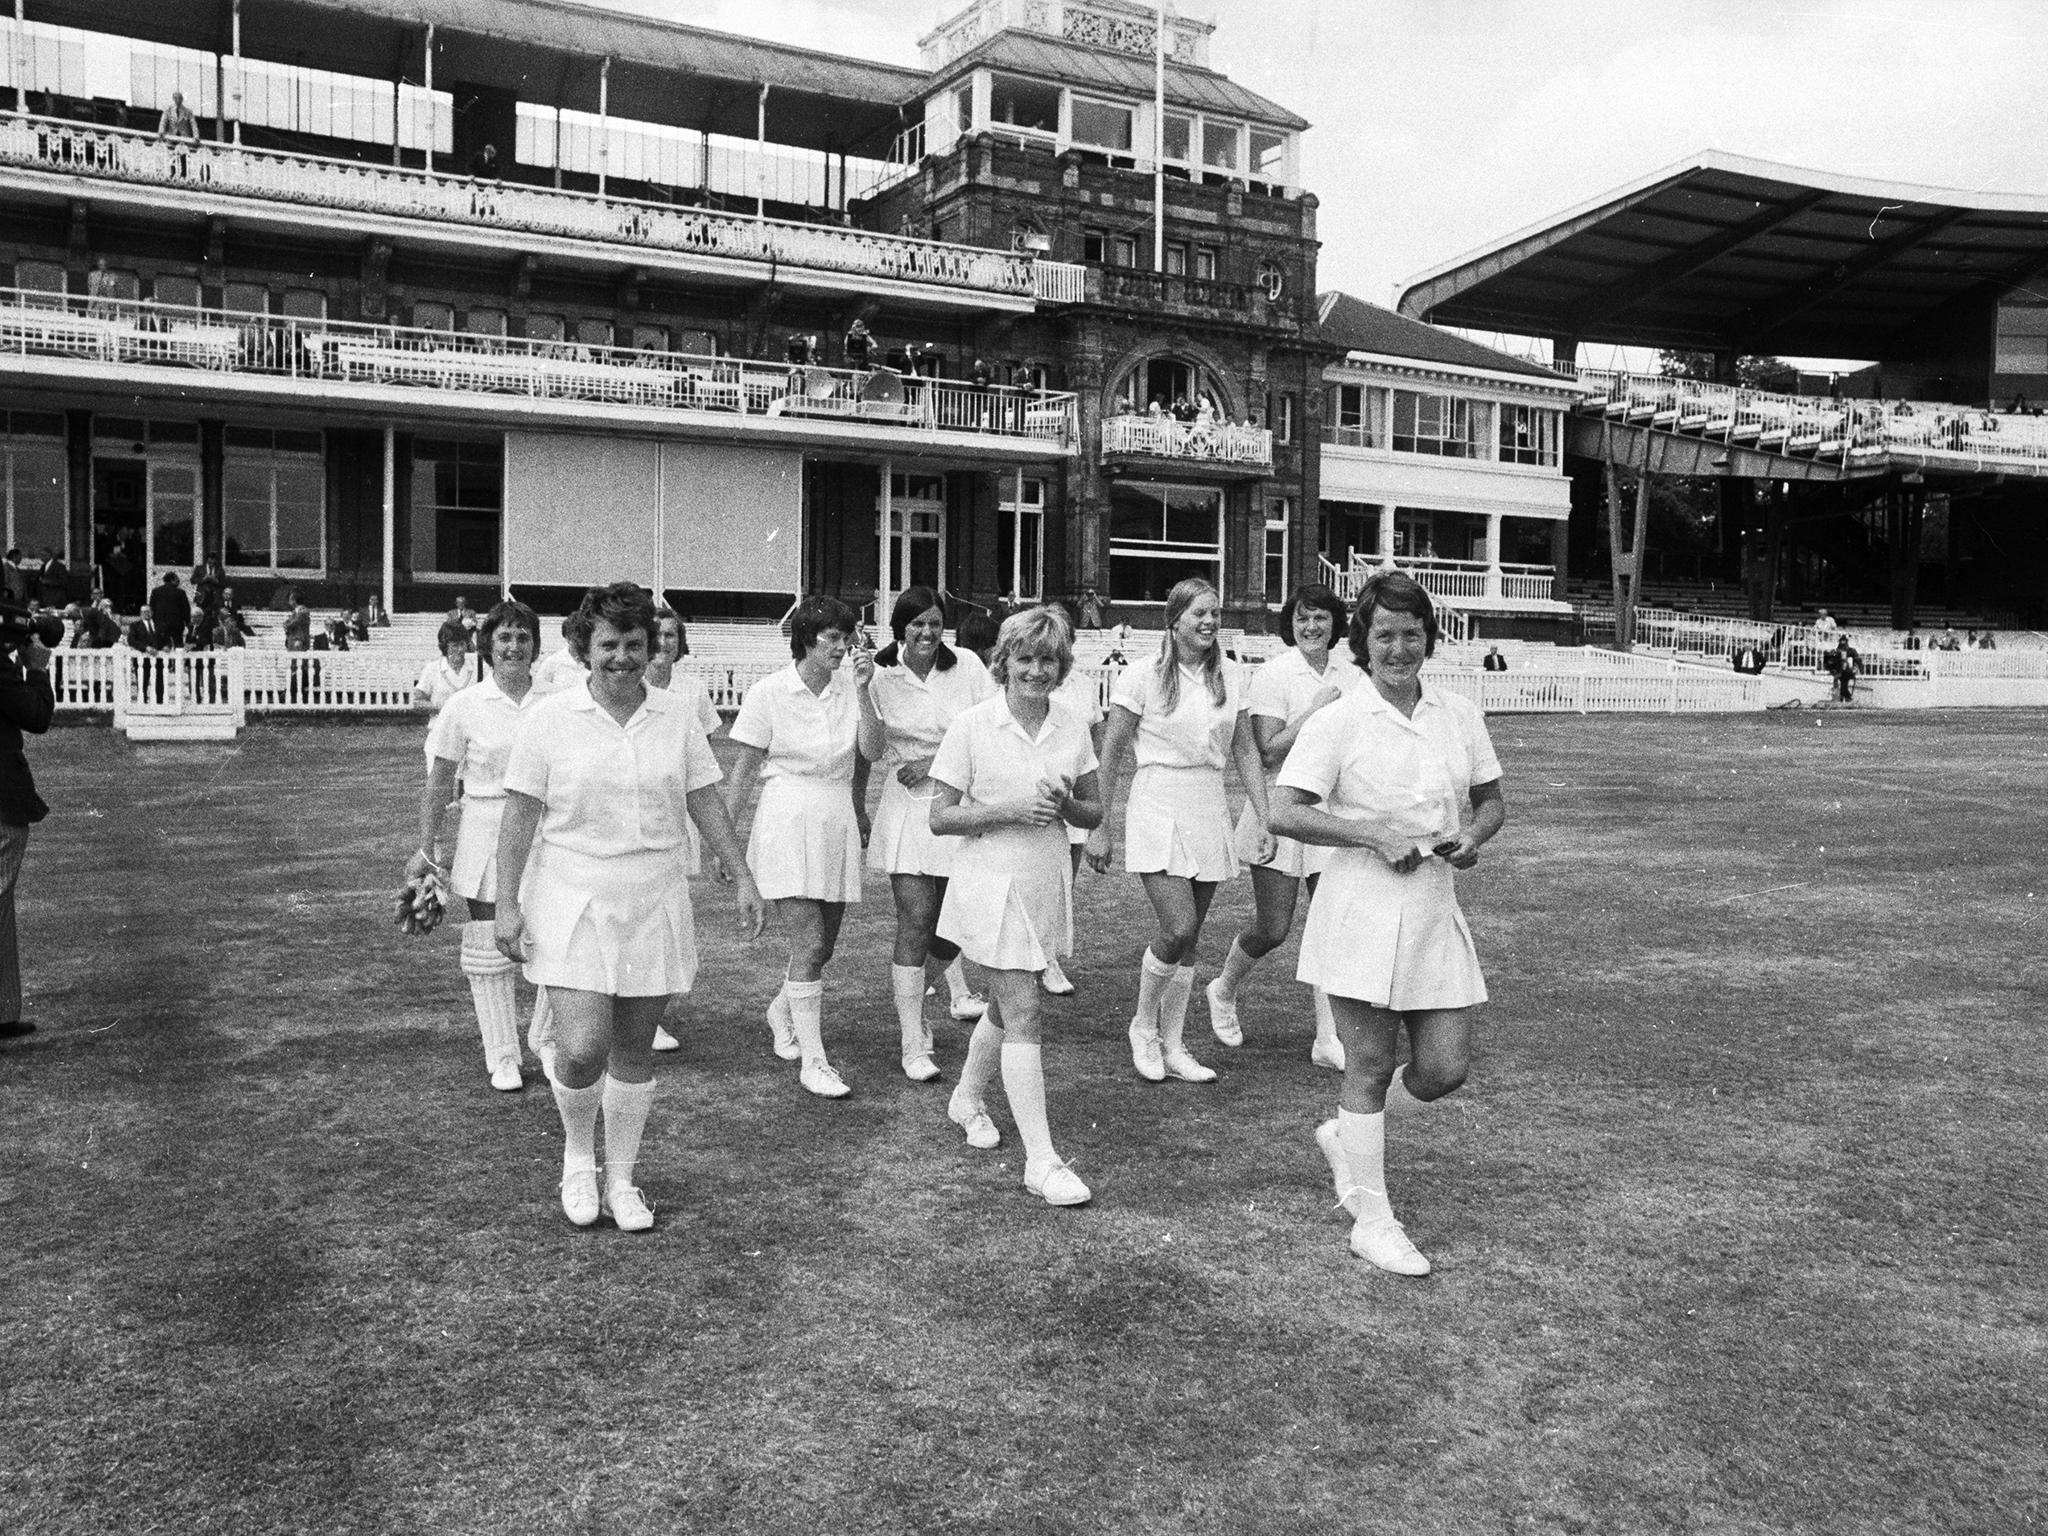 Rachel Heyhoe-Flint, the captain of the English Women's cricket team leads her team onto the pitch for the first ever women's cricket match to be played at Lord's